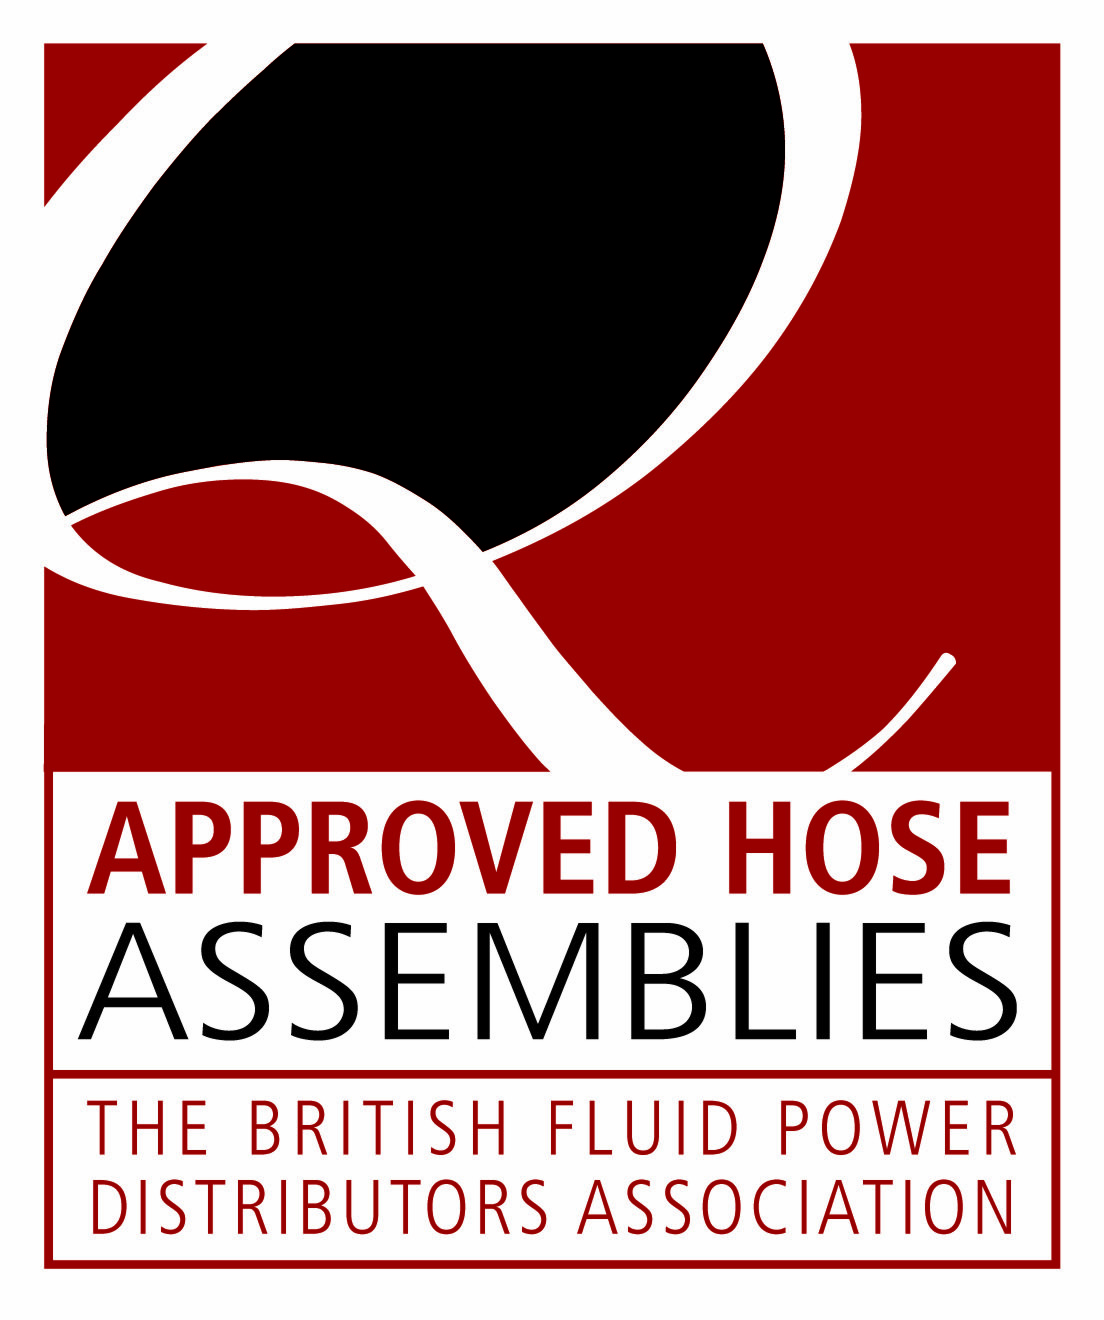 Approved hose assemblies